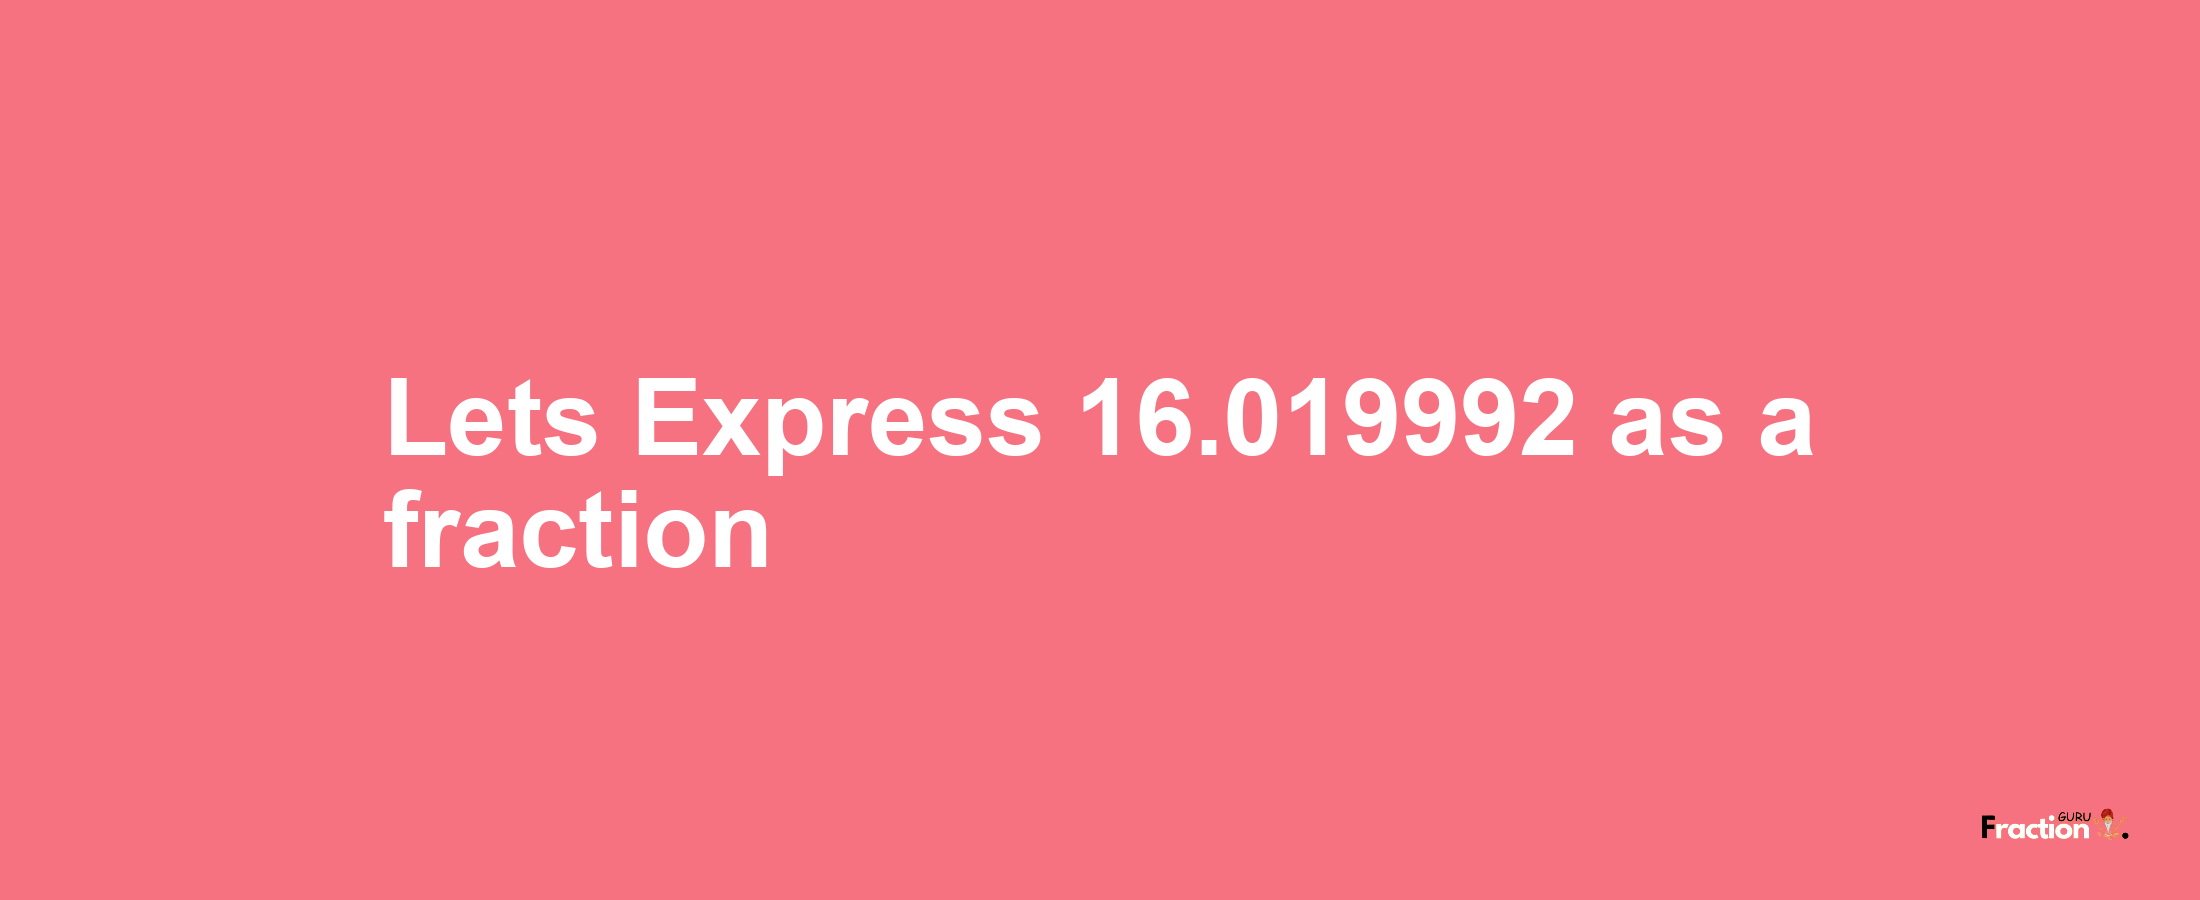 Lets Express 16.019992 as afraction